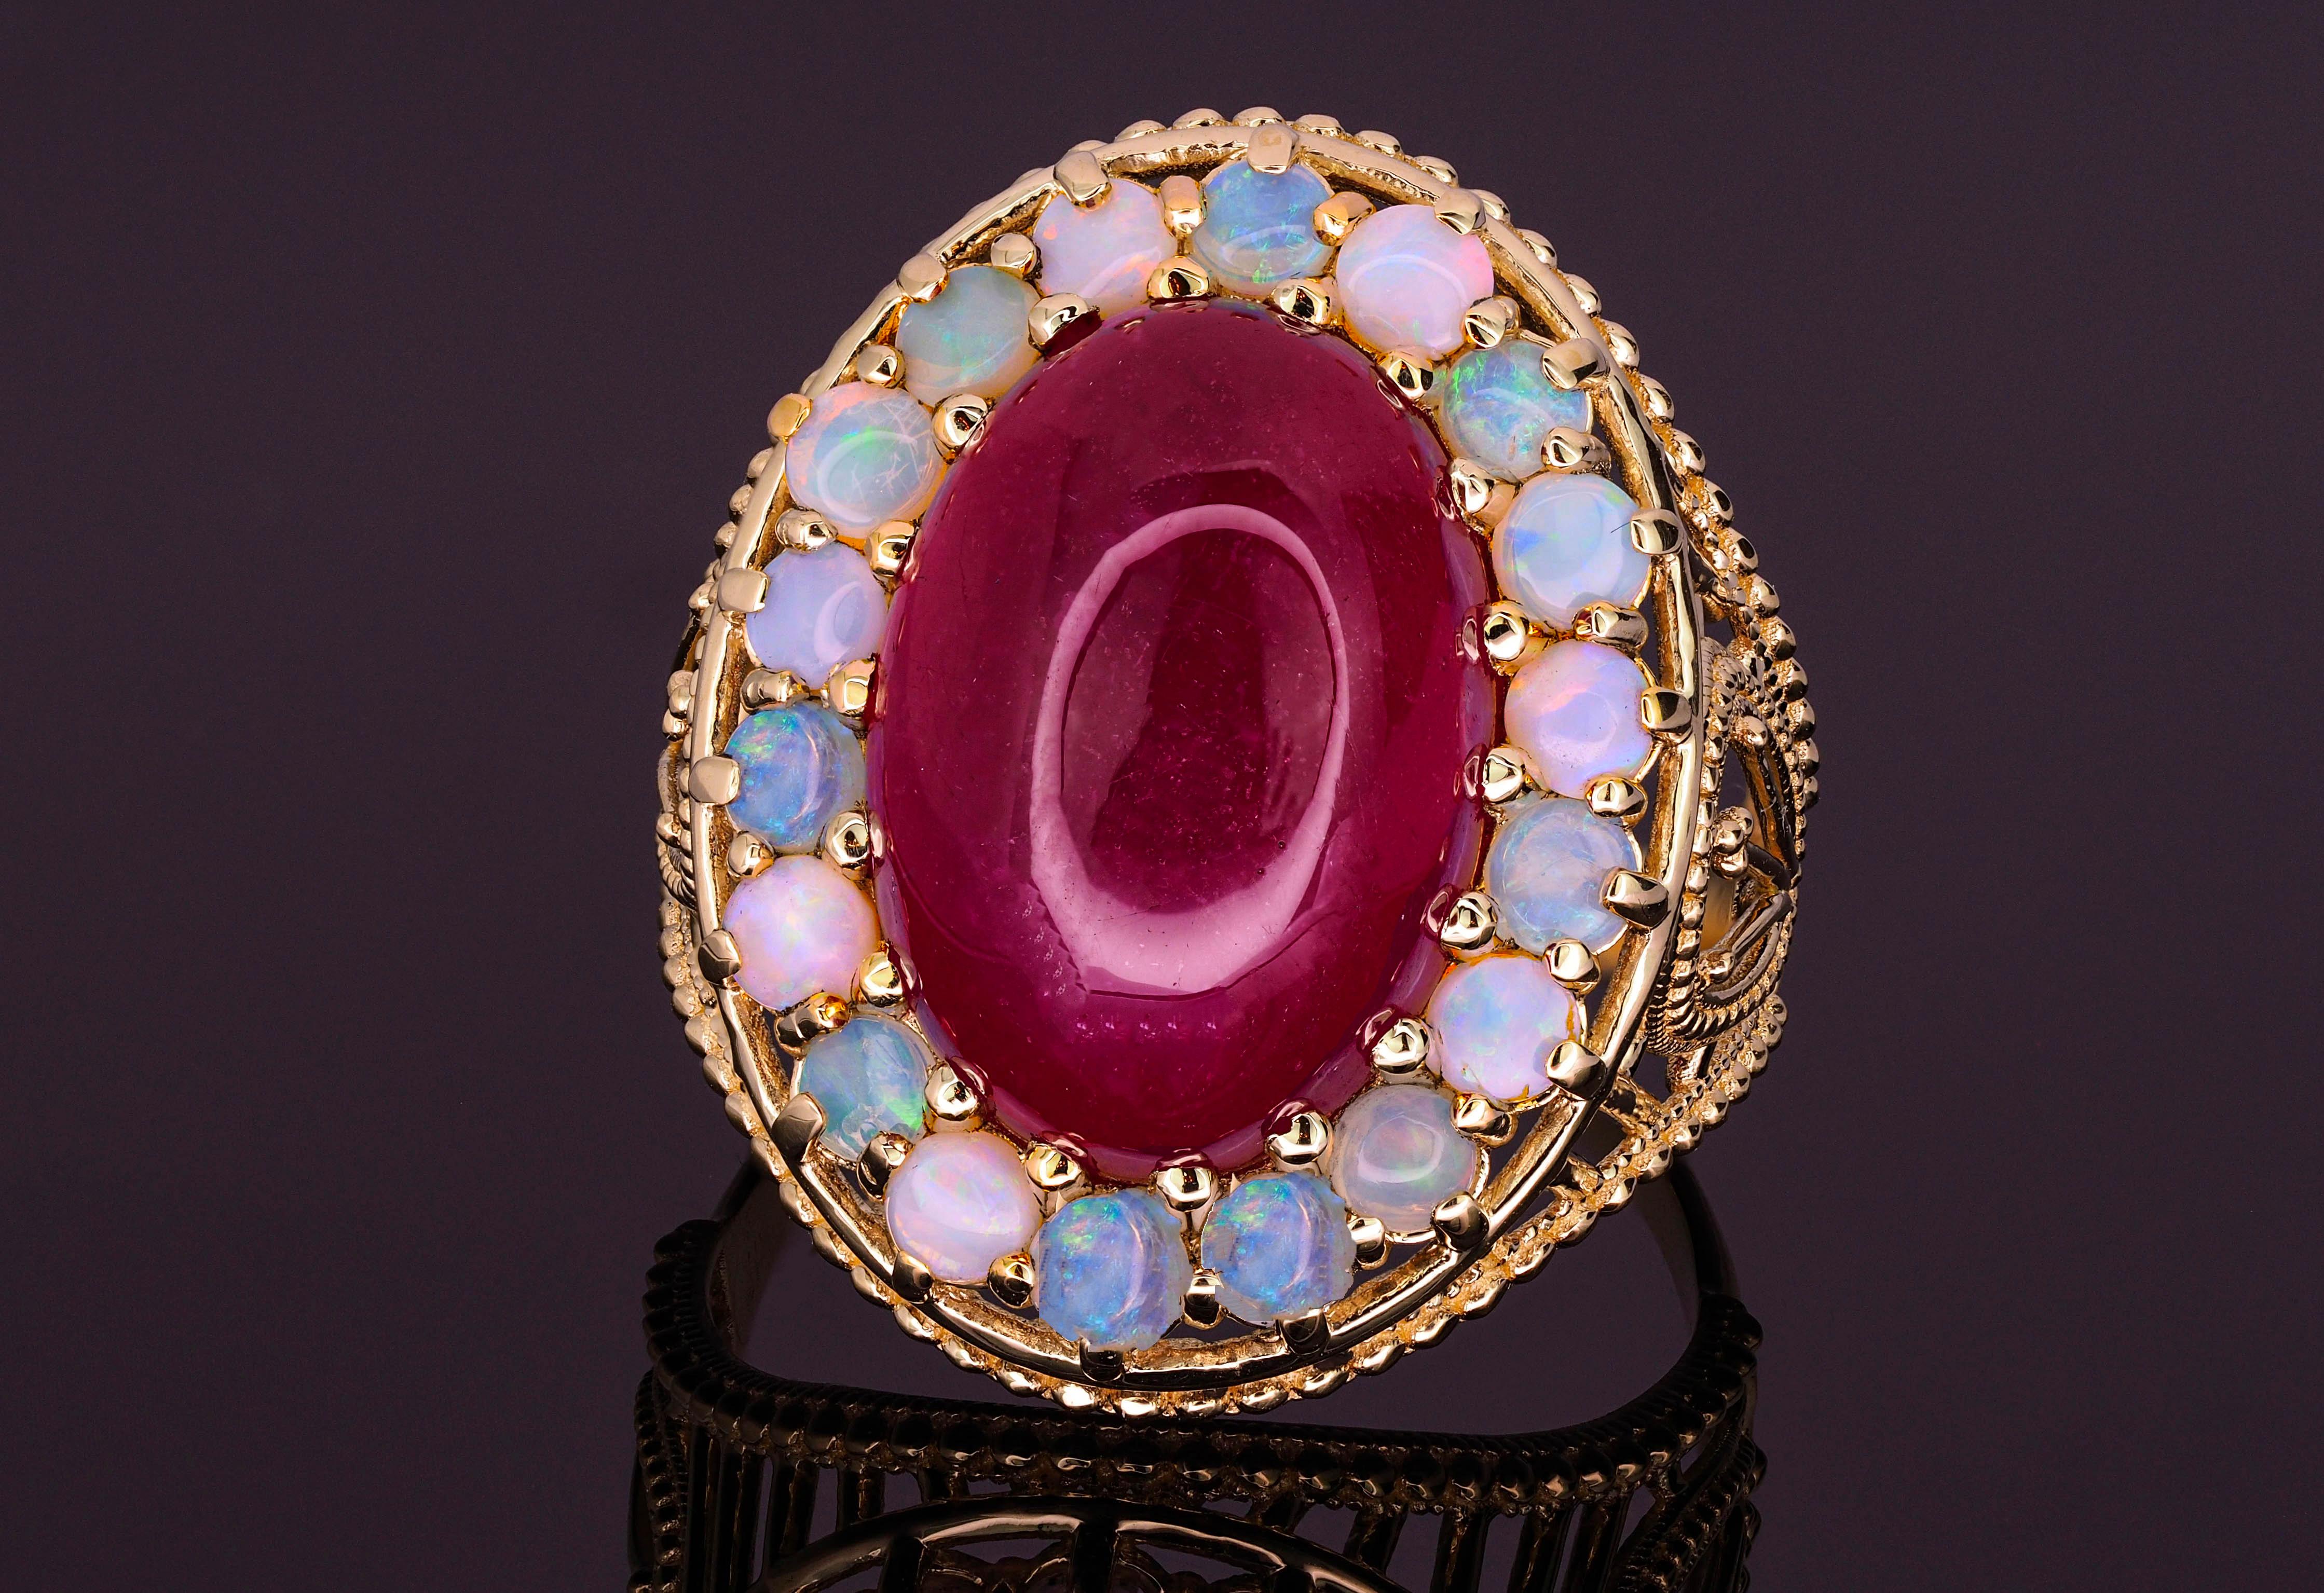 For Sale:  14k Massive Gold Ring with Cabochon Ruby and Opals, Vintage Inspired Ring 9